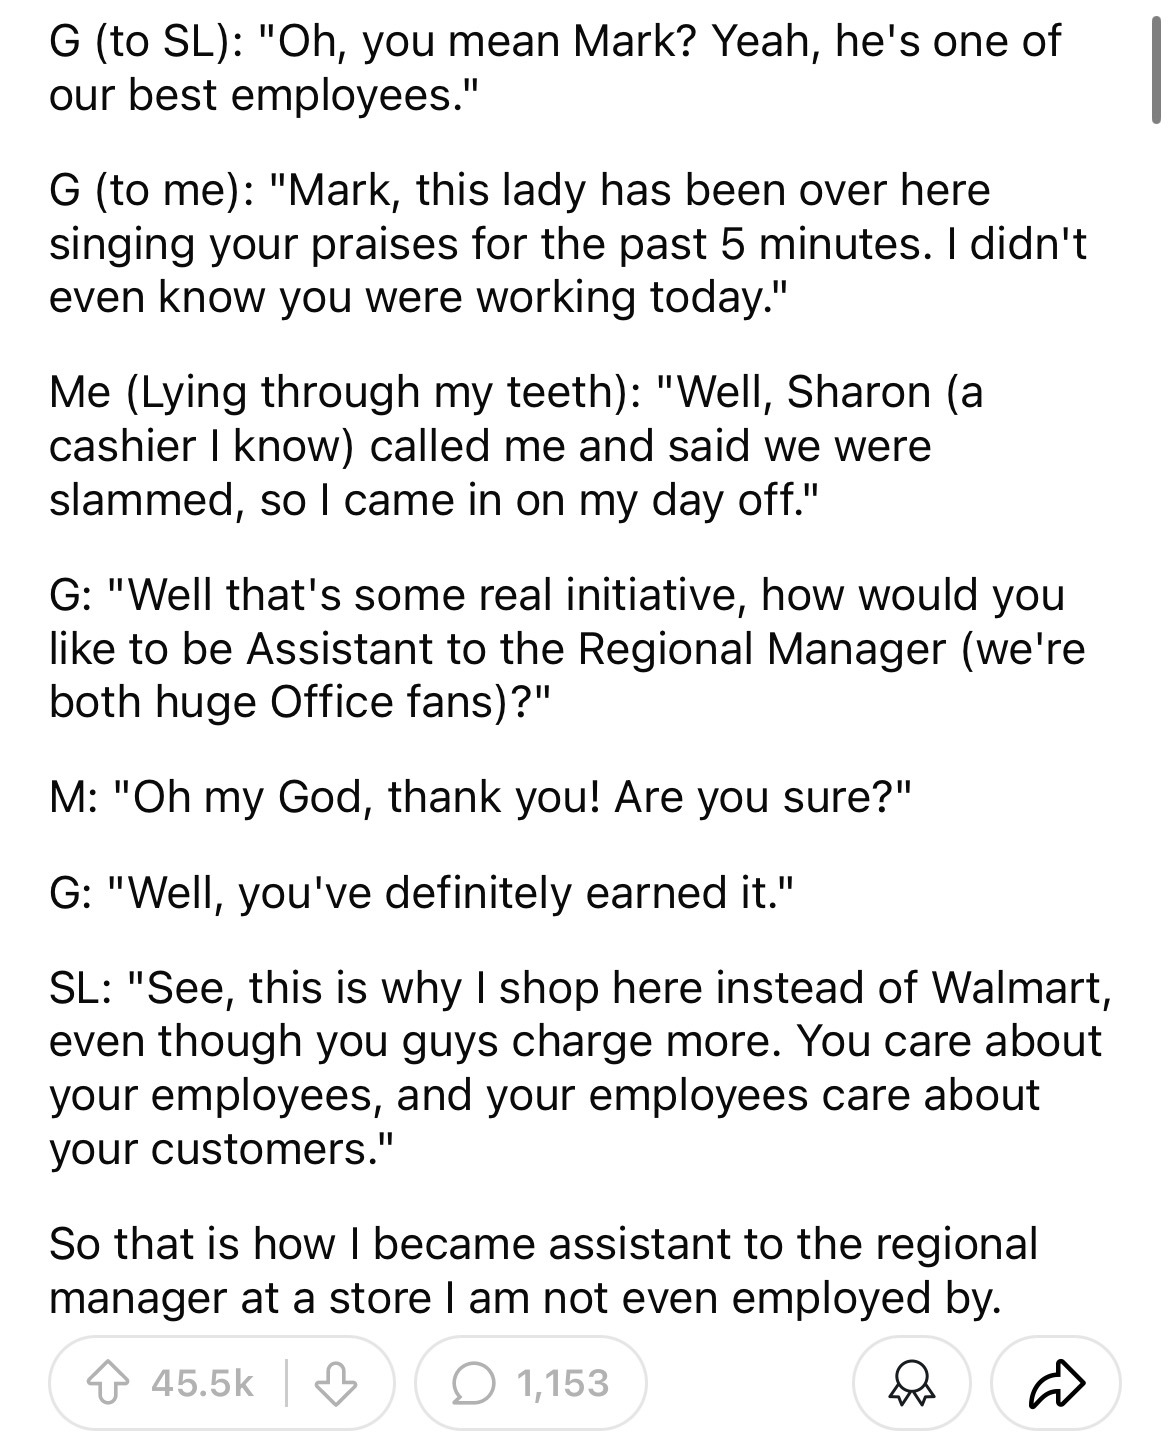 number - G to Sl "Oh, you mean Mark? Yeah, he's one of our best employees." G to me "Mark, this lady has been over here singing your praises for the past 5 minutes. I didn't even know you were working today." Me Lying through my teeth "Well, Sharon a cash